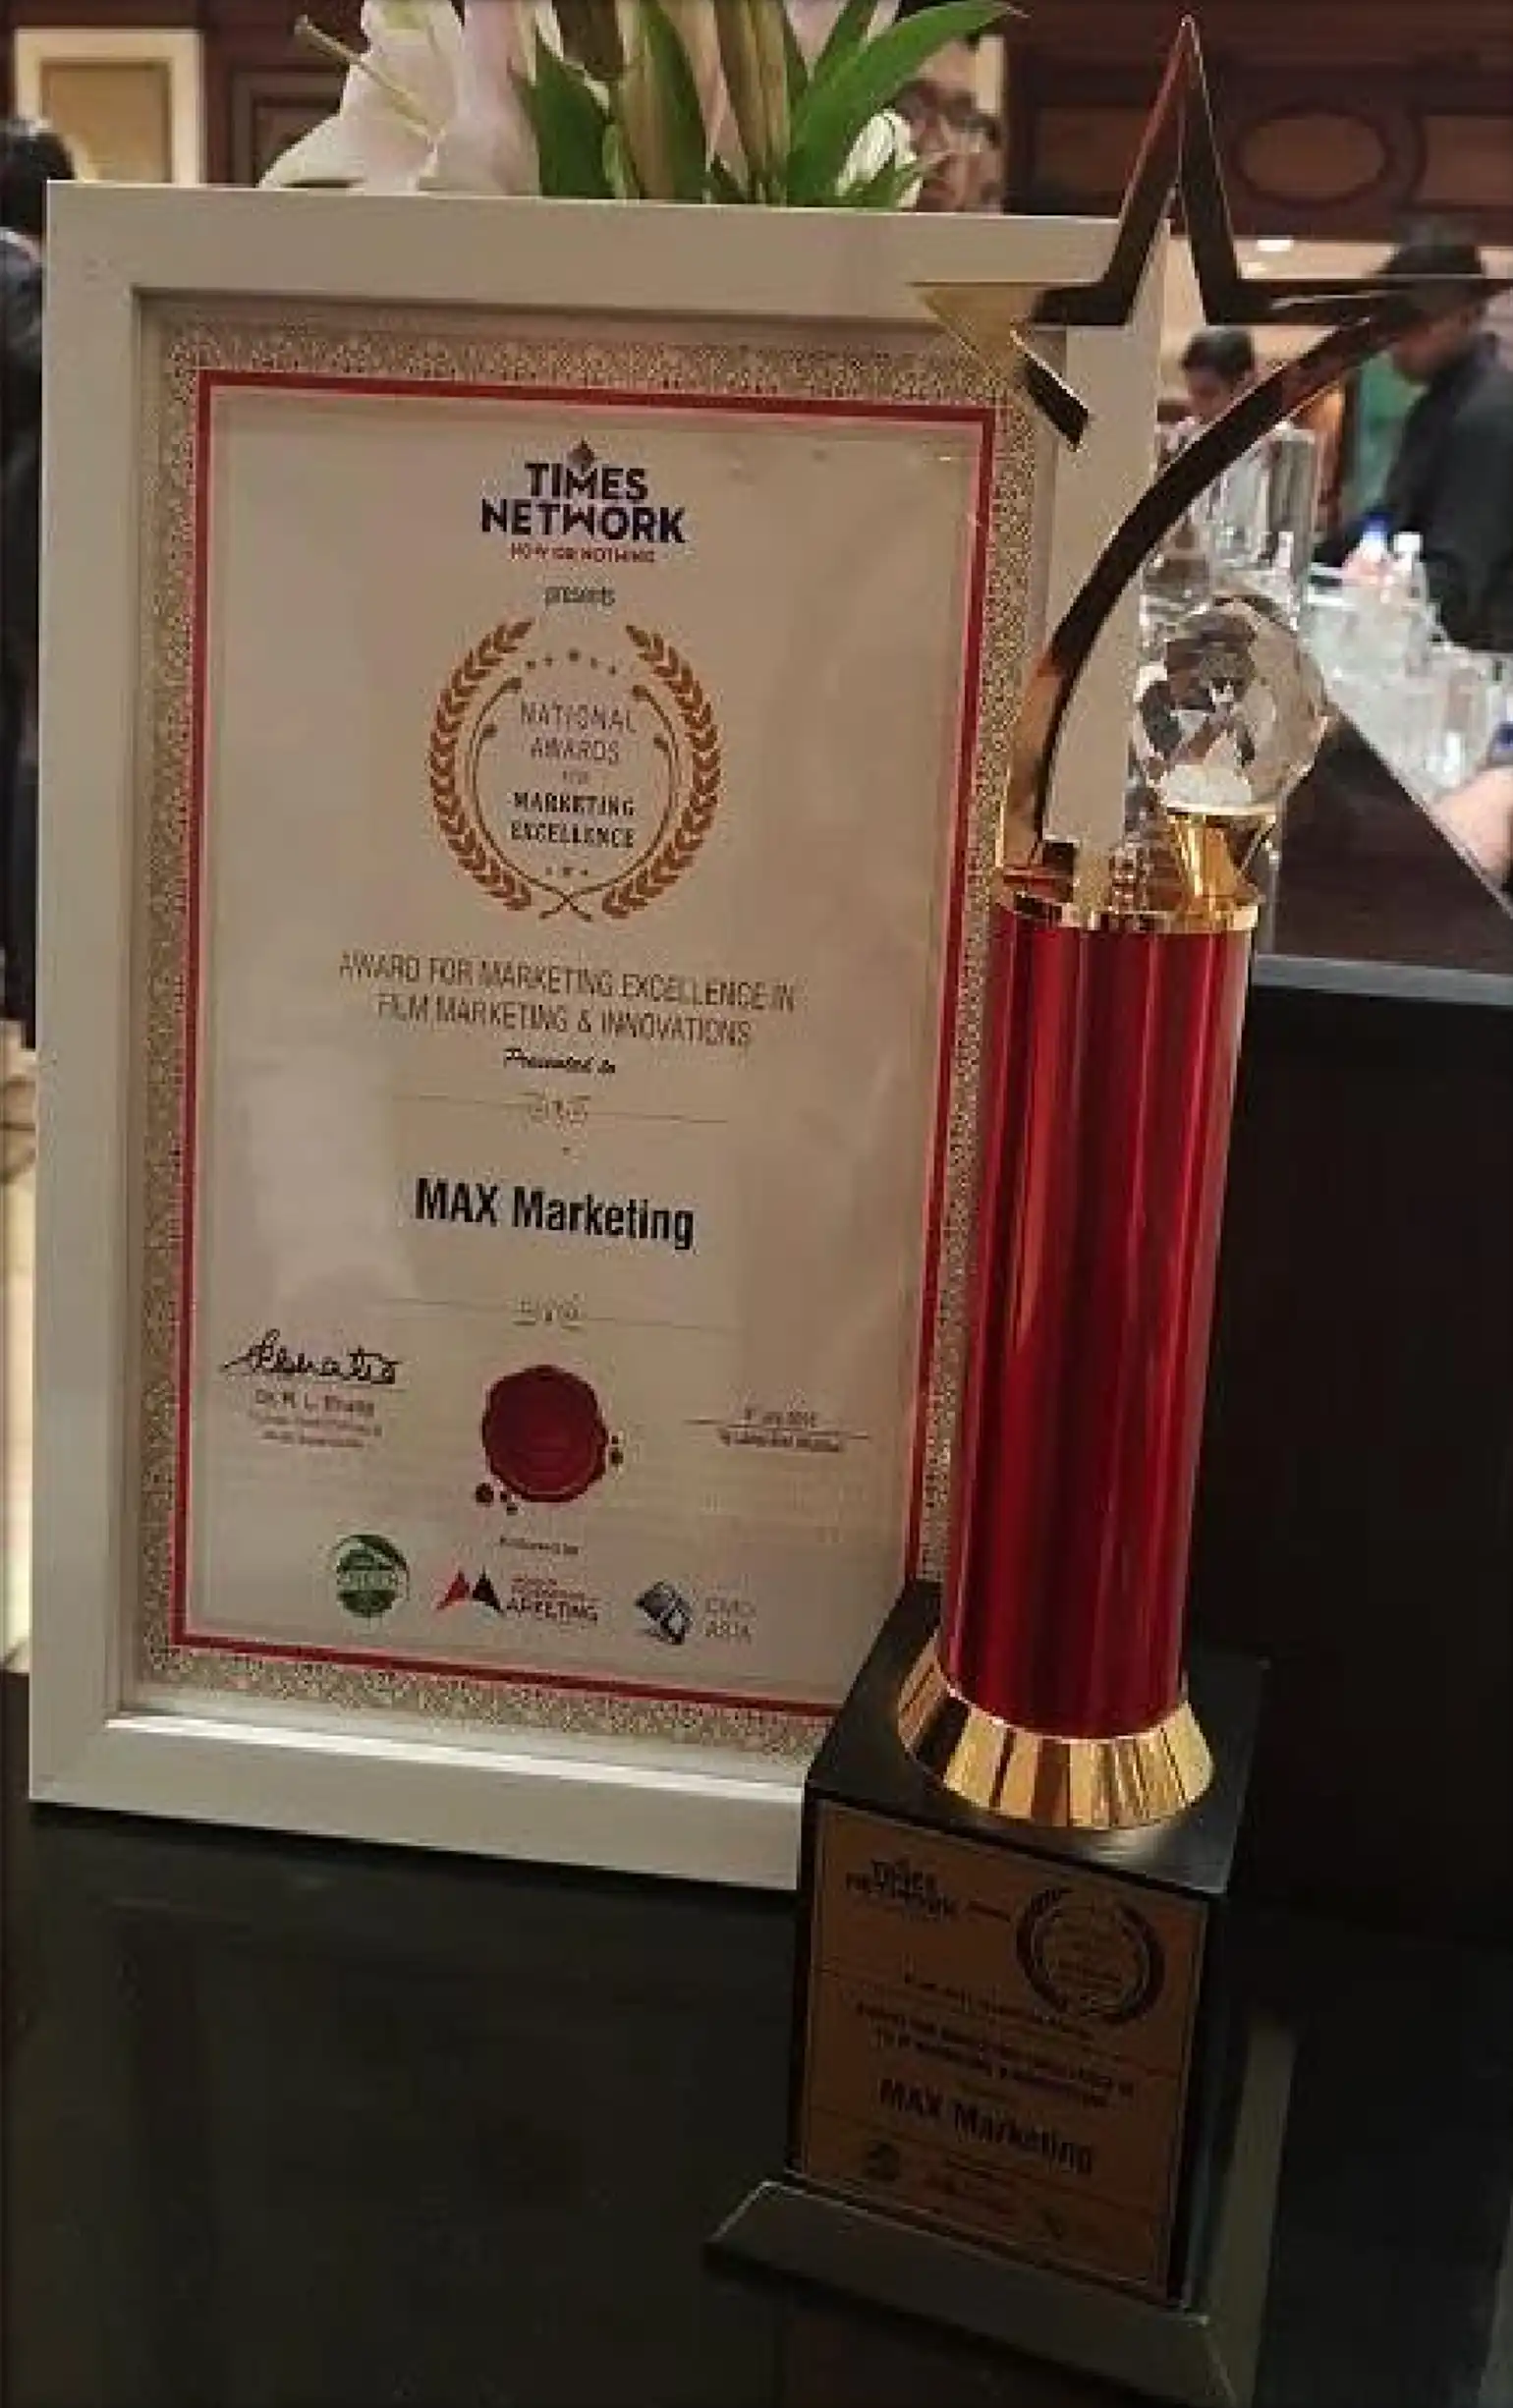 Max Marketing Film And Marketing Excellence